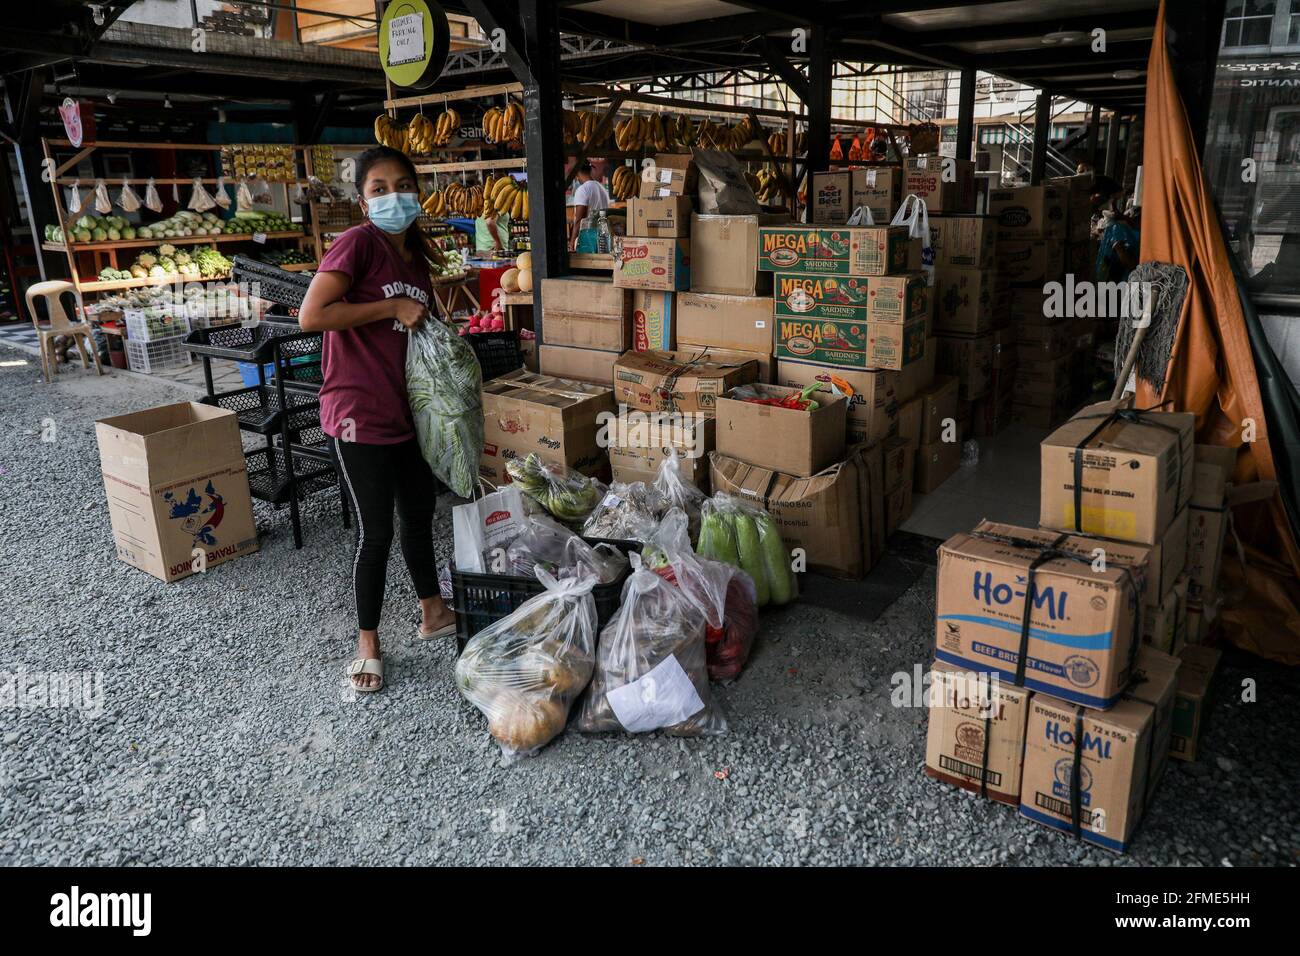 Volunteers prepare food donations at a community pantry in the Maginhawa neighborhood in Quezon City. Despite allegations by law enforcers as communist underground organizations that want to undermine the government, community pantries have sprouted across the country in the past week to help people affected by strict quarantine measures to curb the spread of the coronavirus disease. Metro Manila, Philippines. Stock Photo